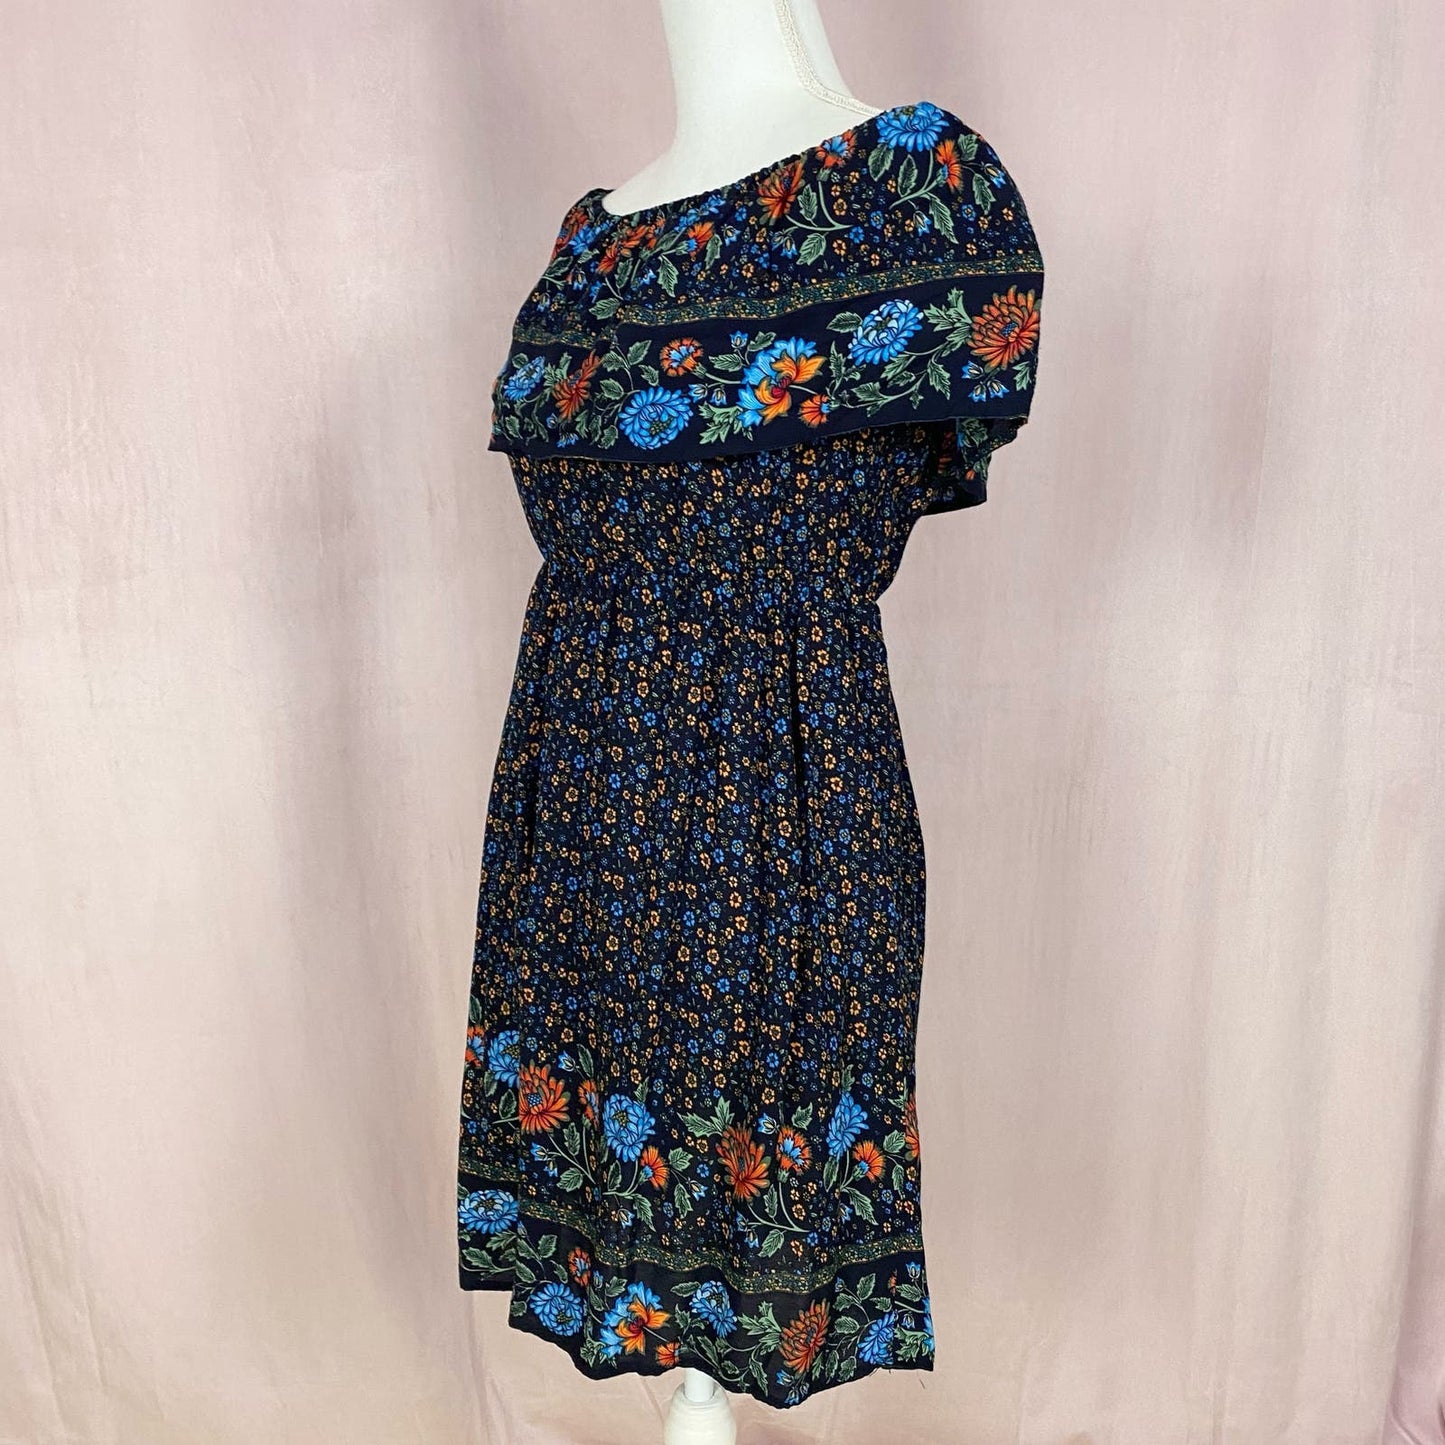 Secondhand Off Shoulder Boho Floral Swing Mini Dress, Size Small